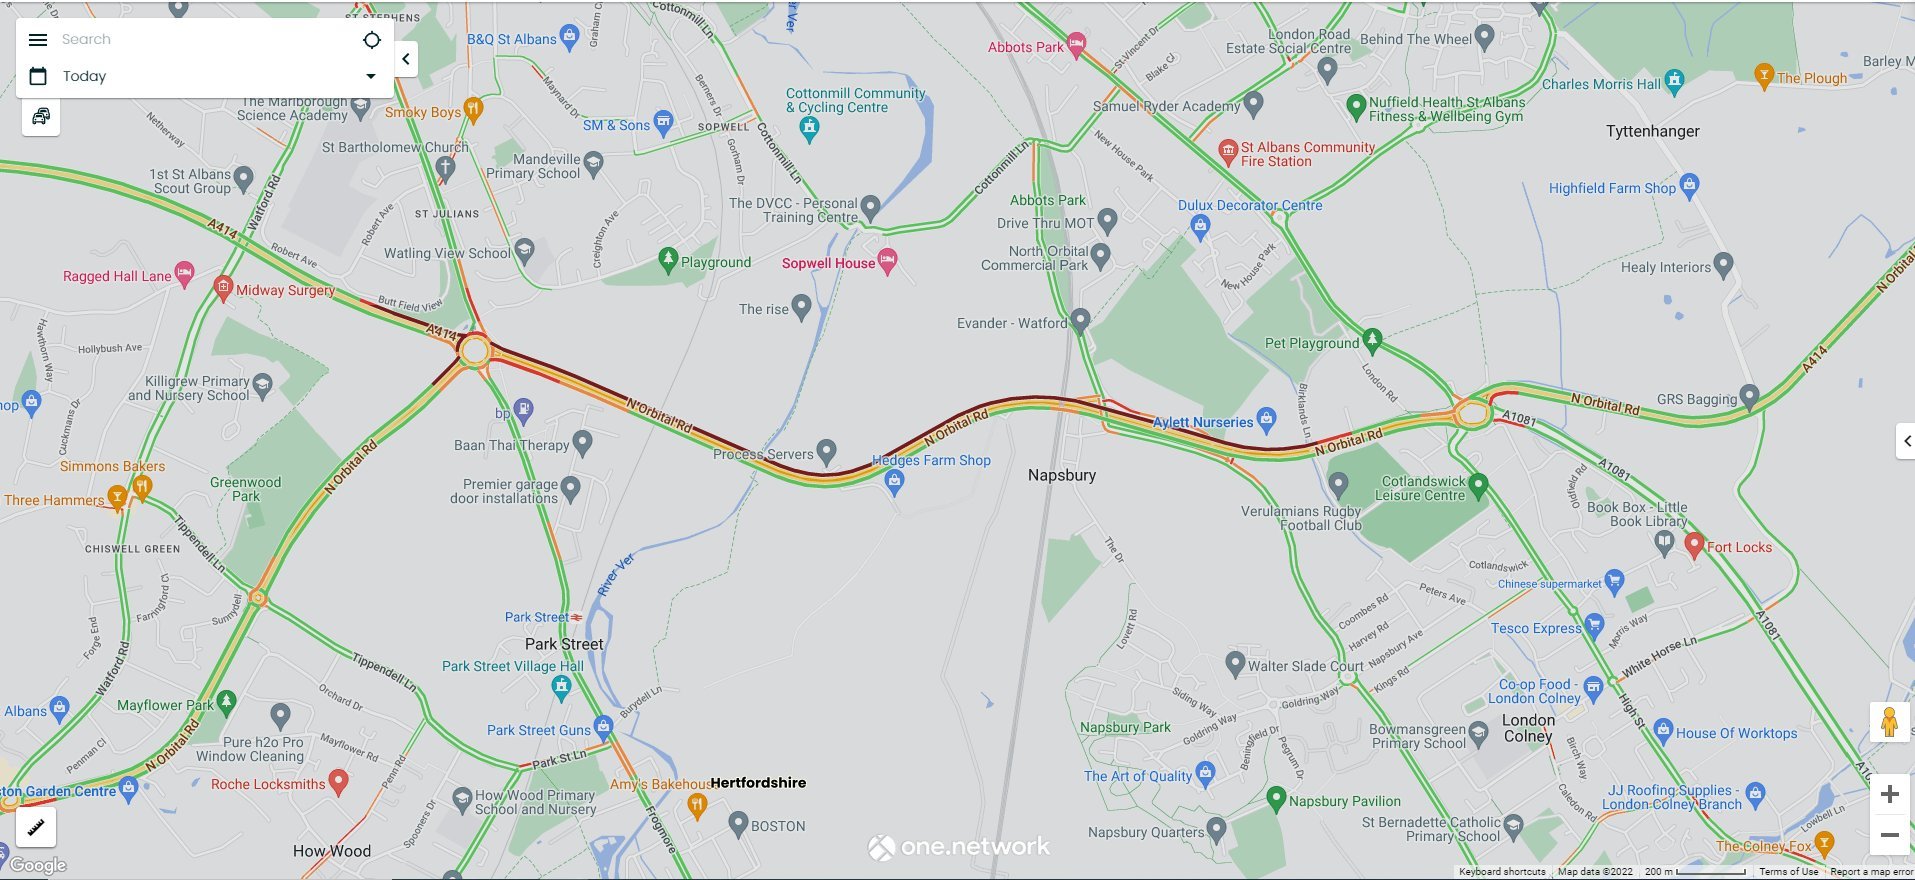 Google Maps’ live traffic feature is a digital twin. Source: Hertfordshire Highways 12 December 2022